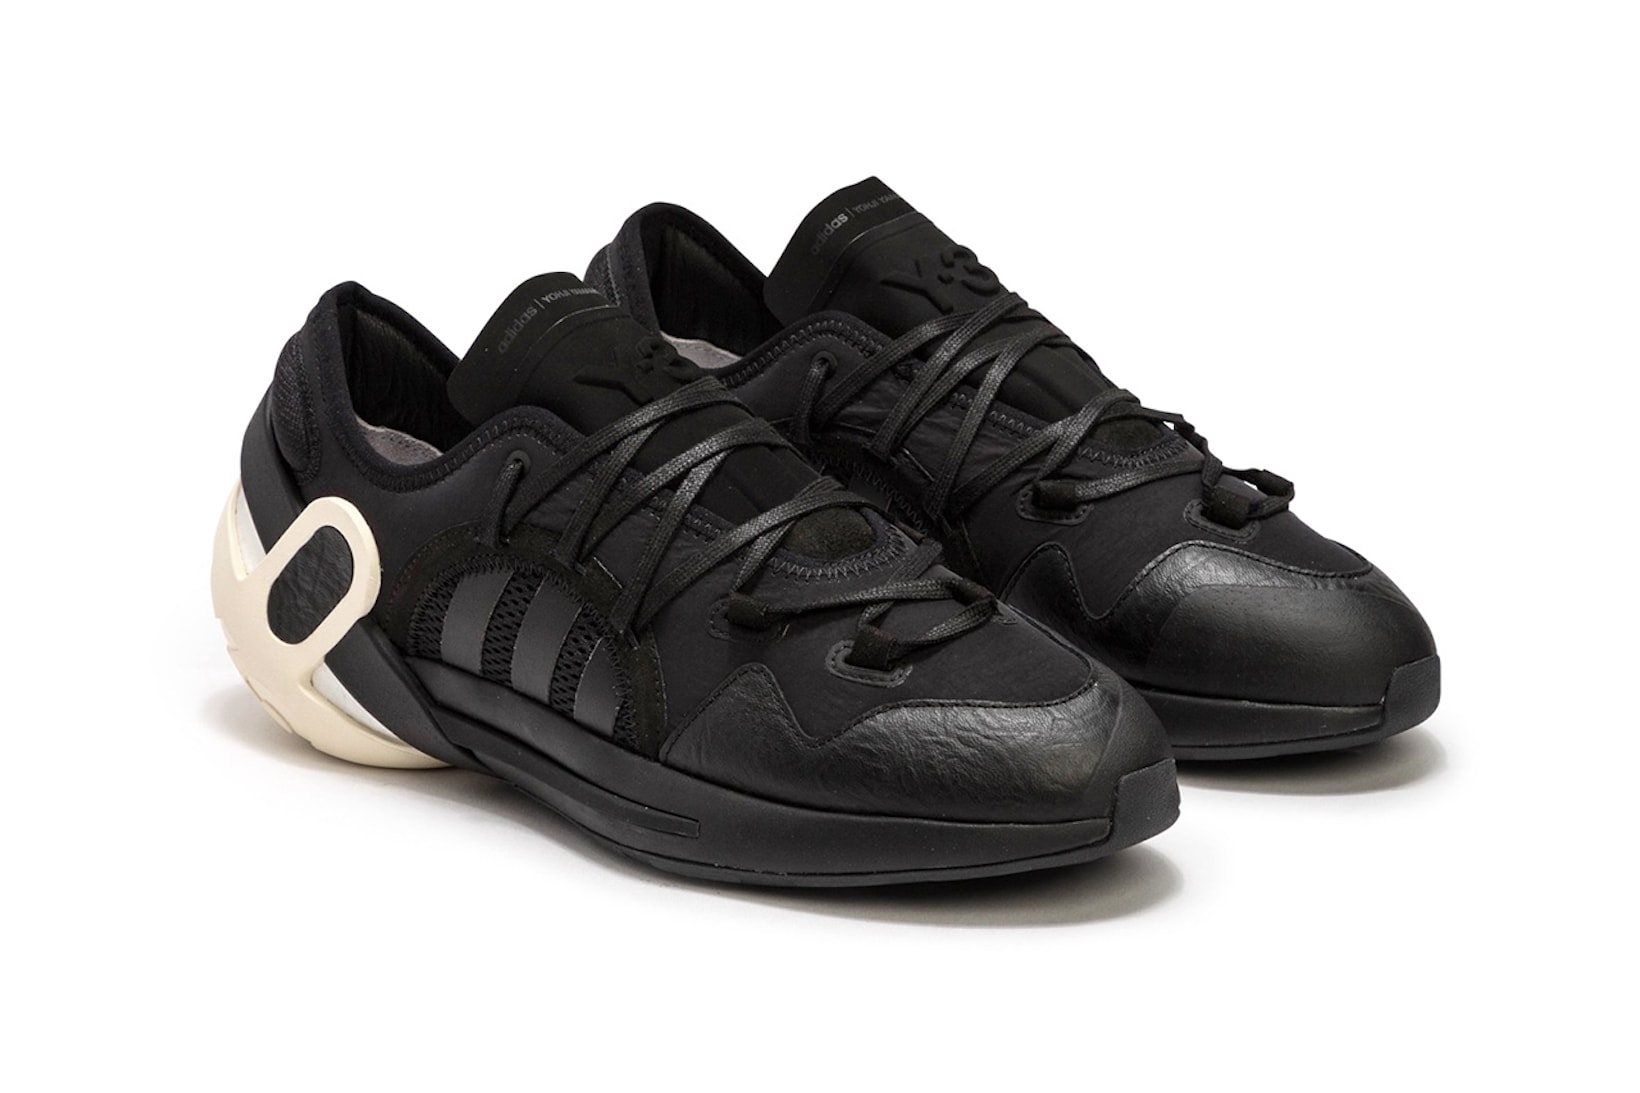 adidas Y-3 IDOSO BOOST Sneakers Footwear Shoes Black Cream Lateral